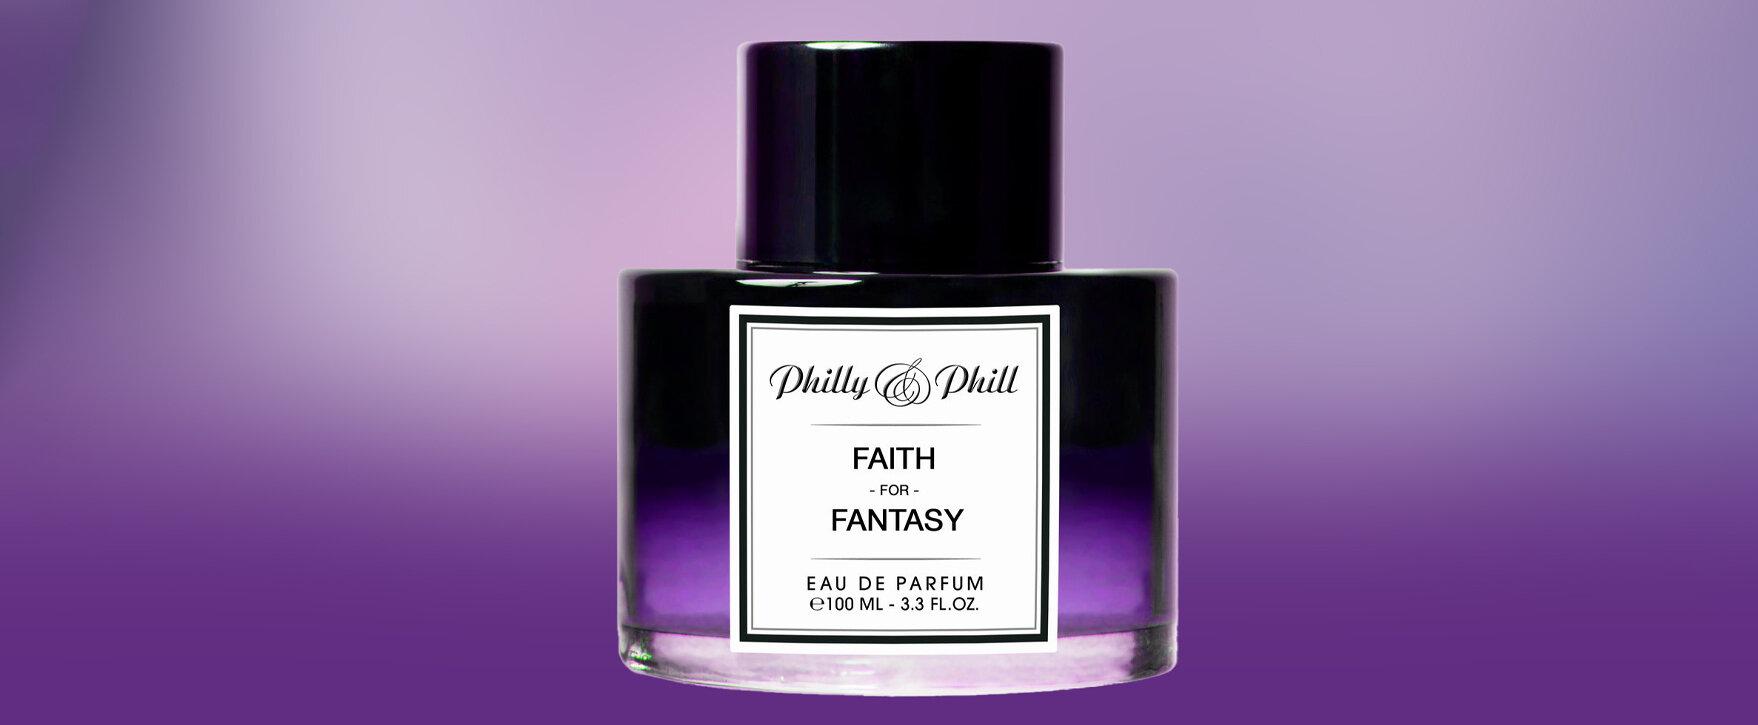 Galactic New Release From Philly & Phill Is Titled “Faith for Fantasy”.